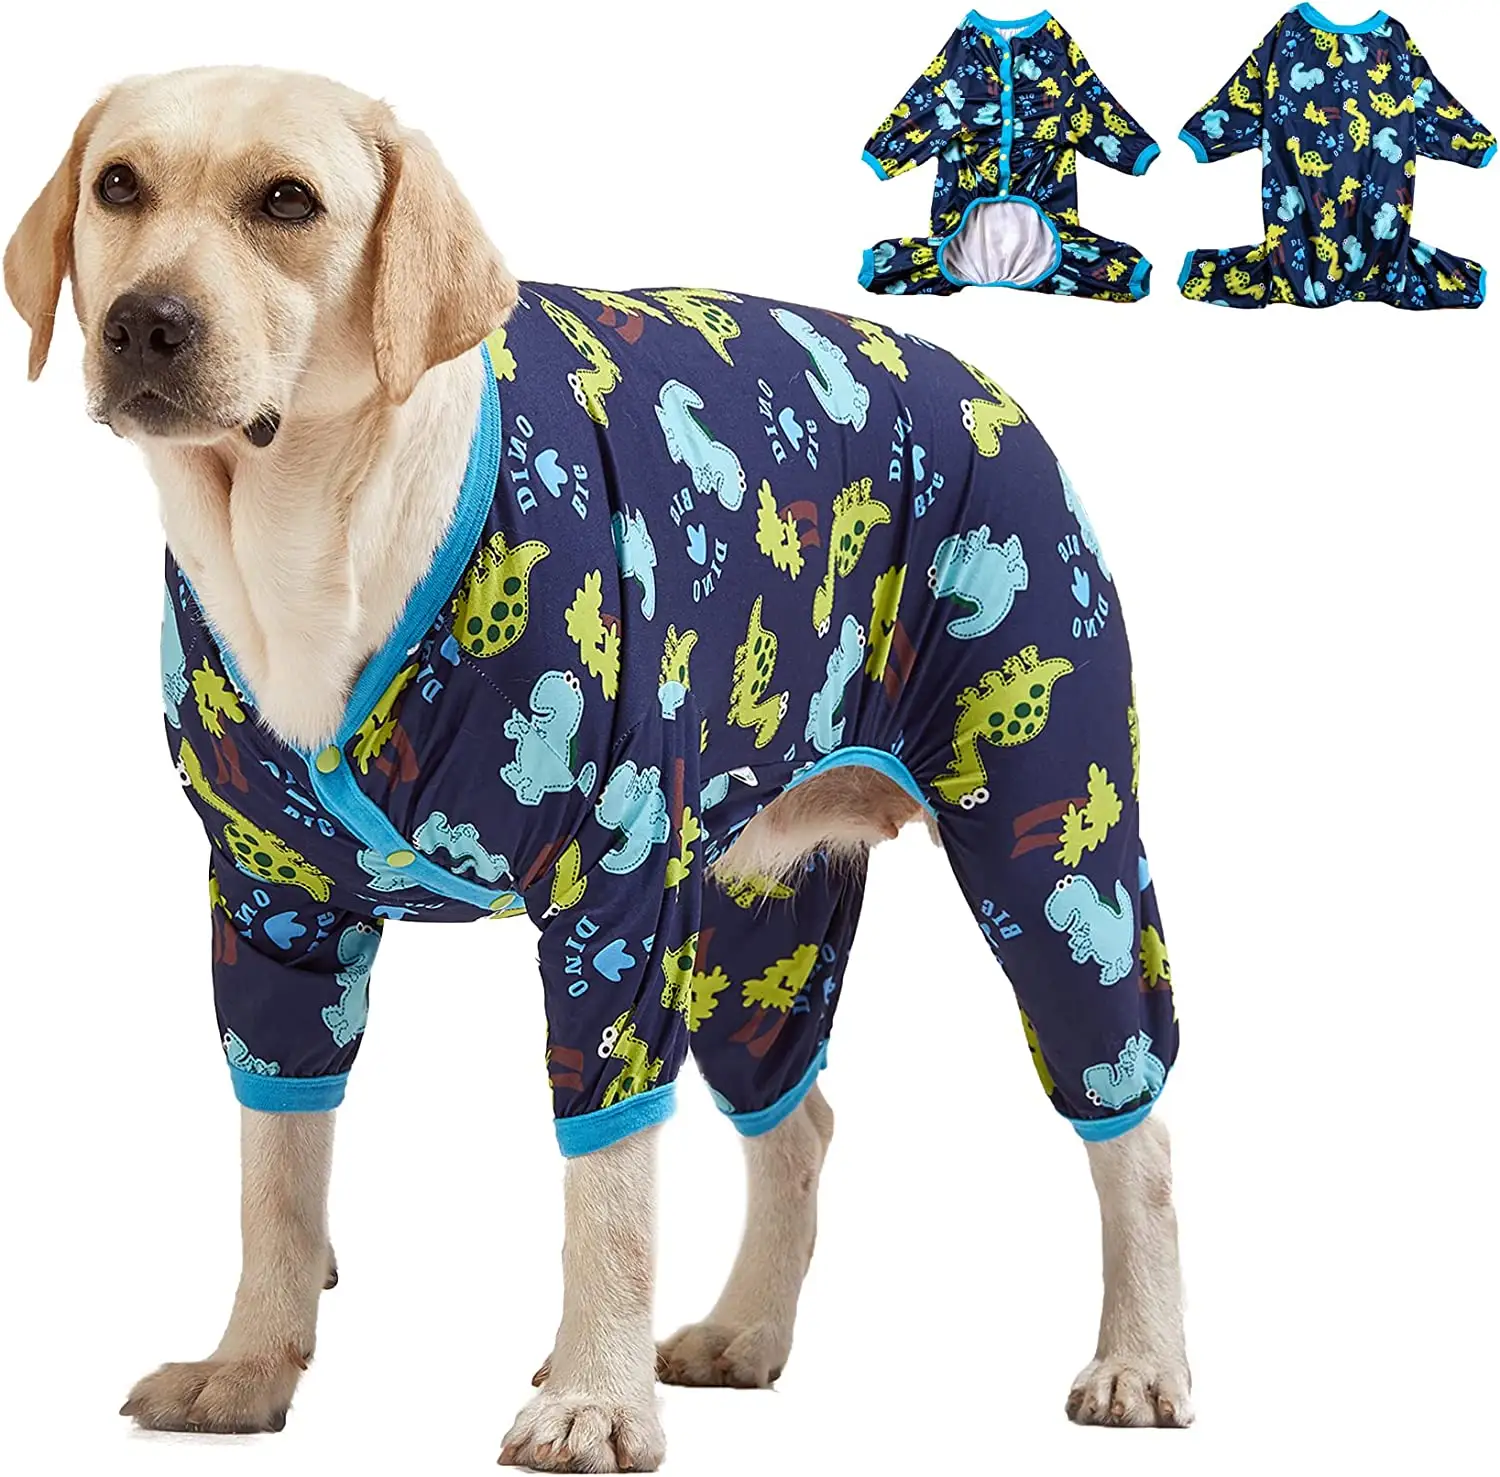 Dog Clothing For Large Dogs: Dinosaur In The Jungle Print Lightweight Stretchy Knit Pullover Puppy Pajamas Large Dog Onesie.